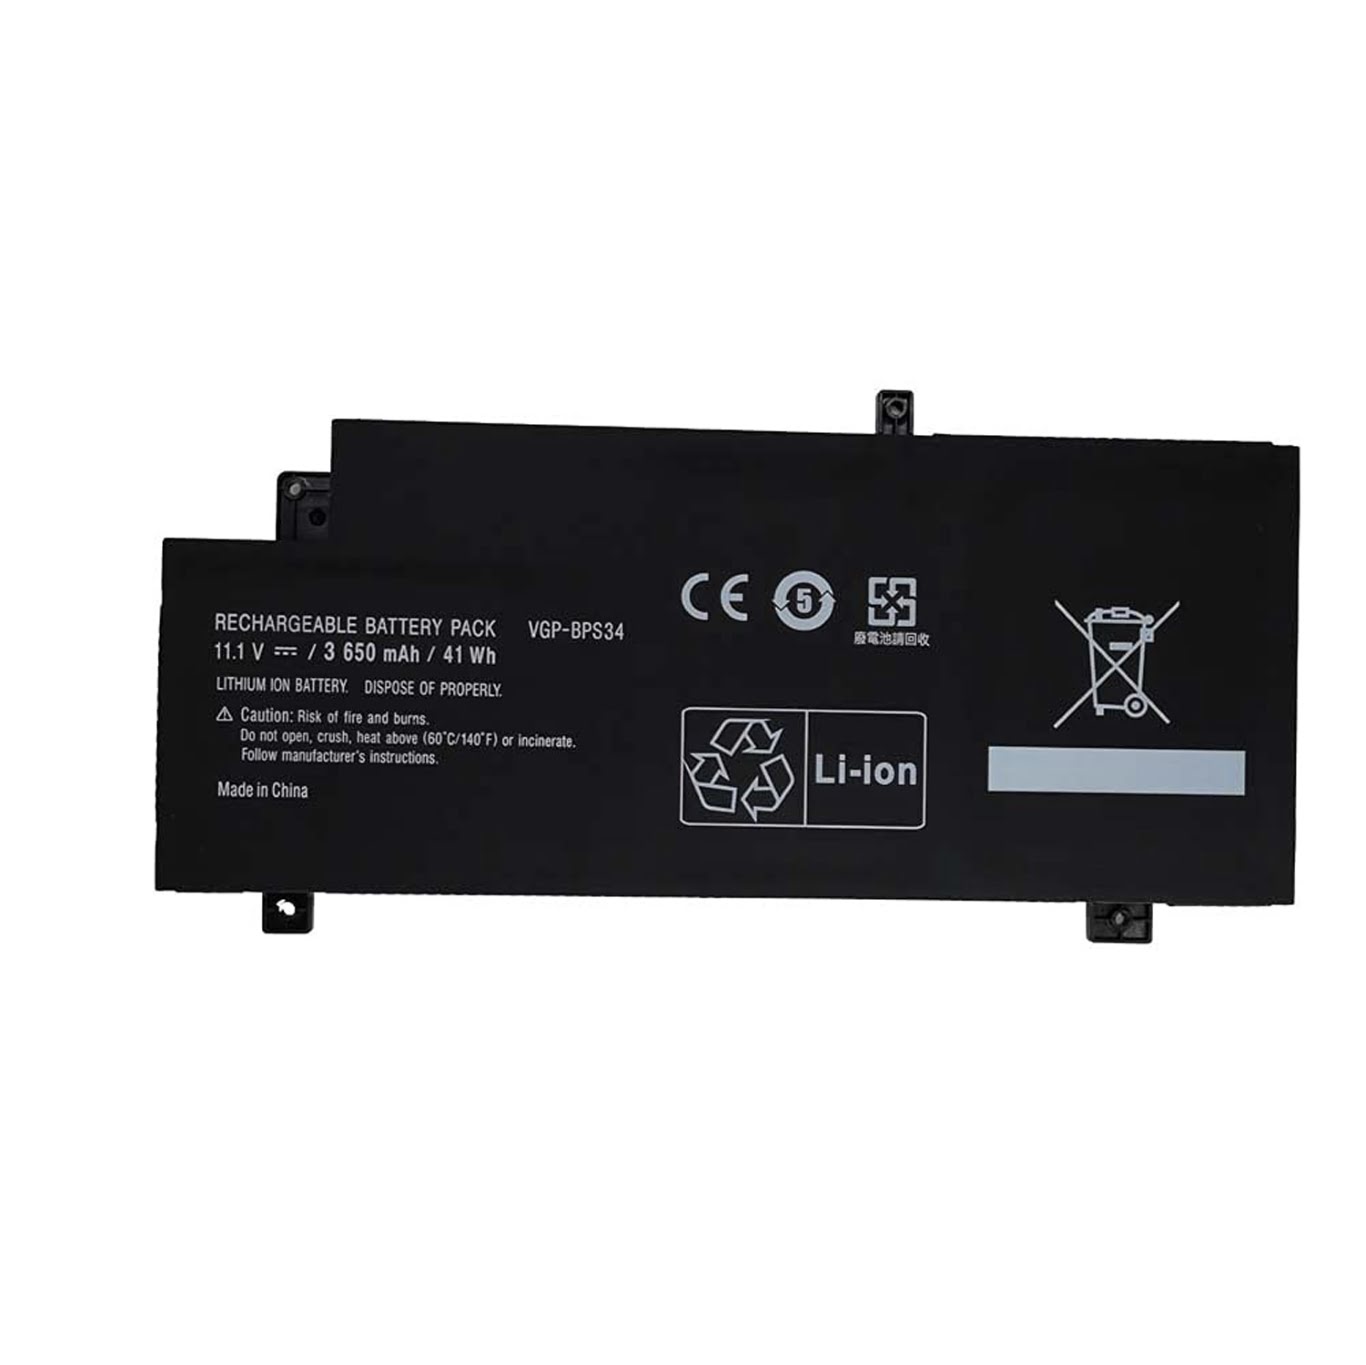 Sony Vgp-bps34, Vgp-bpl34 Laptop Battery For Vaio 15 Touch Laptop, Vaio Svf15a16cxb replacement